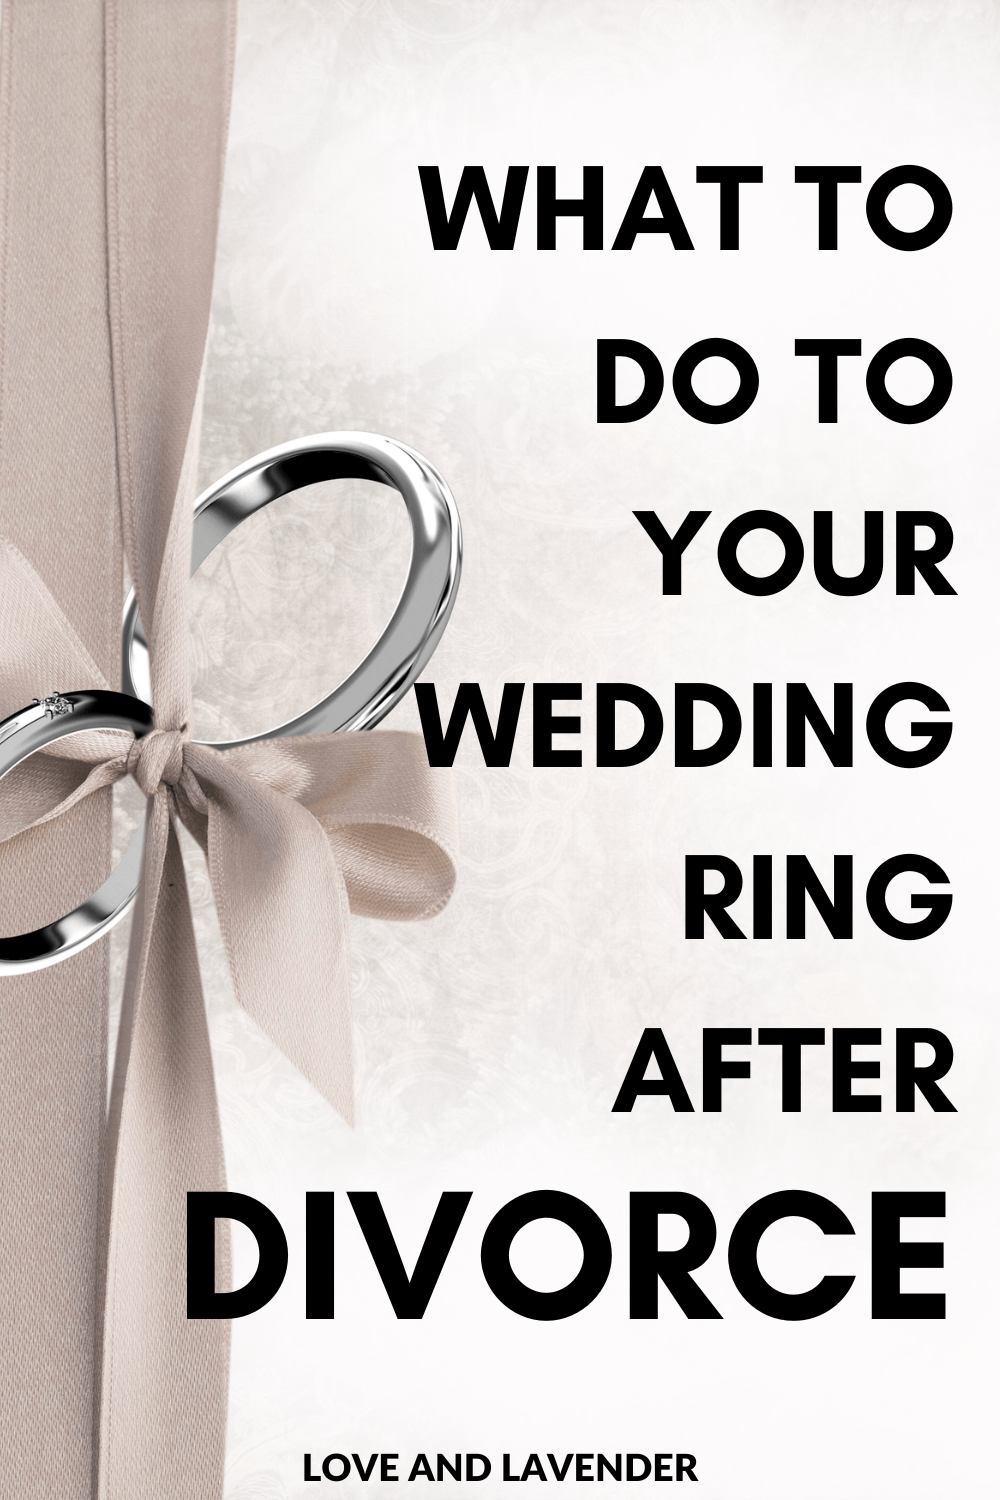 If you are going through a divorce or just want to get rid of some old wedding rings, this website will provide you with information on how to go about selling those rings.